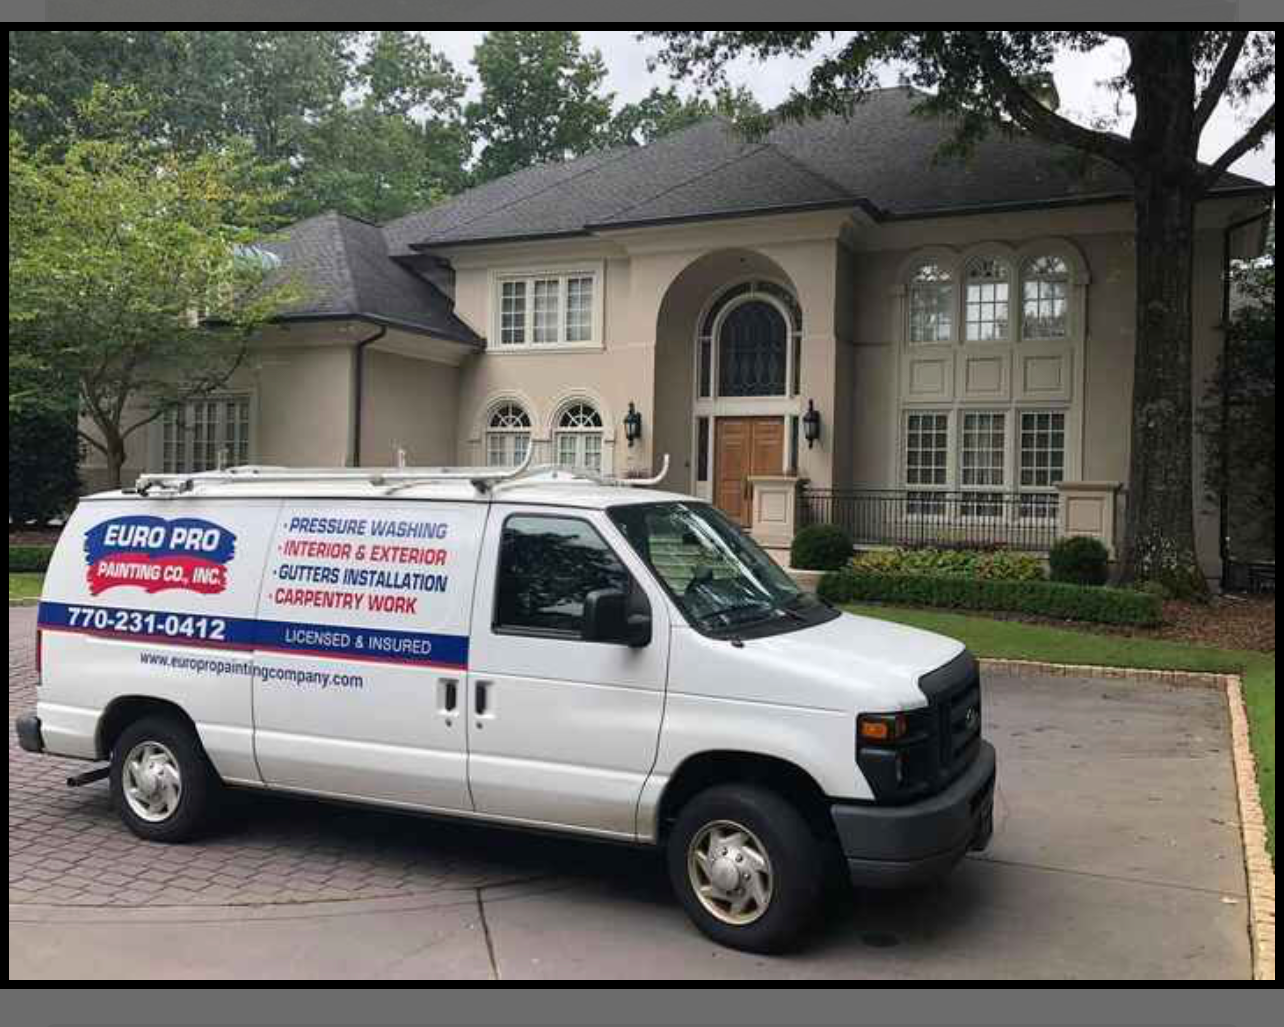 Exterior for Euro Pro Painting Company in Lawerenceville, GA